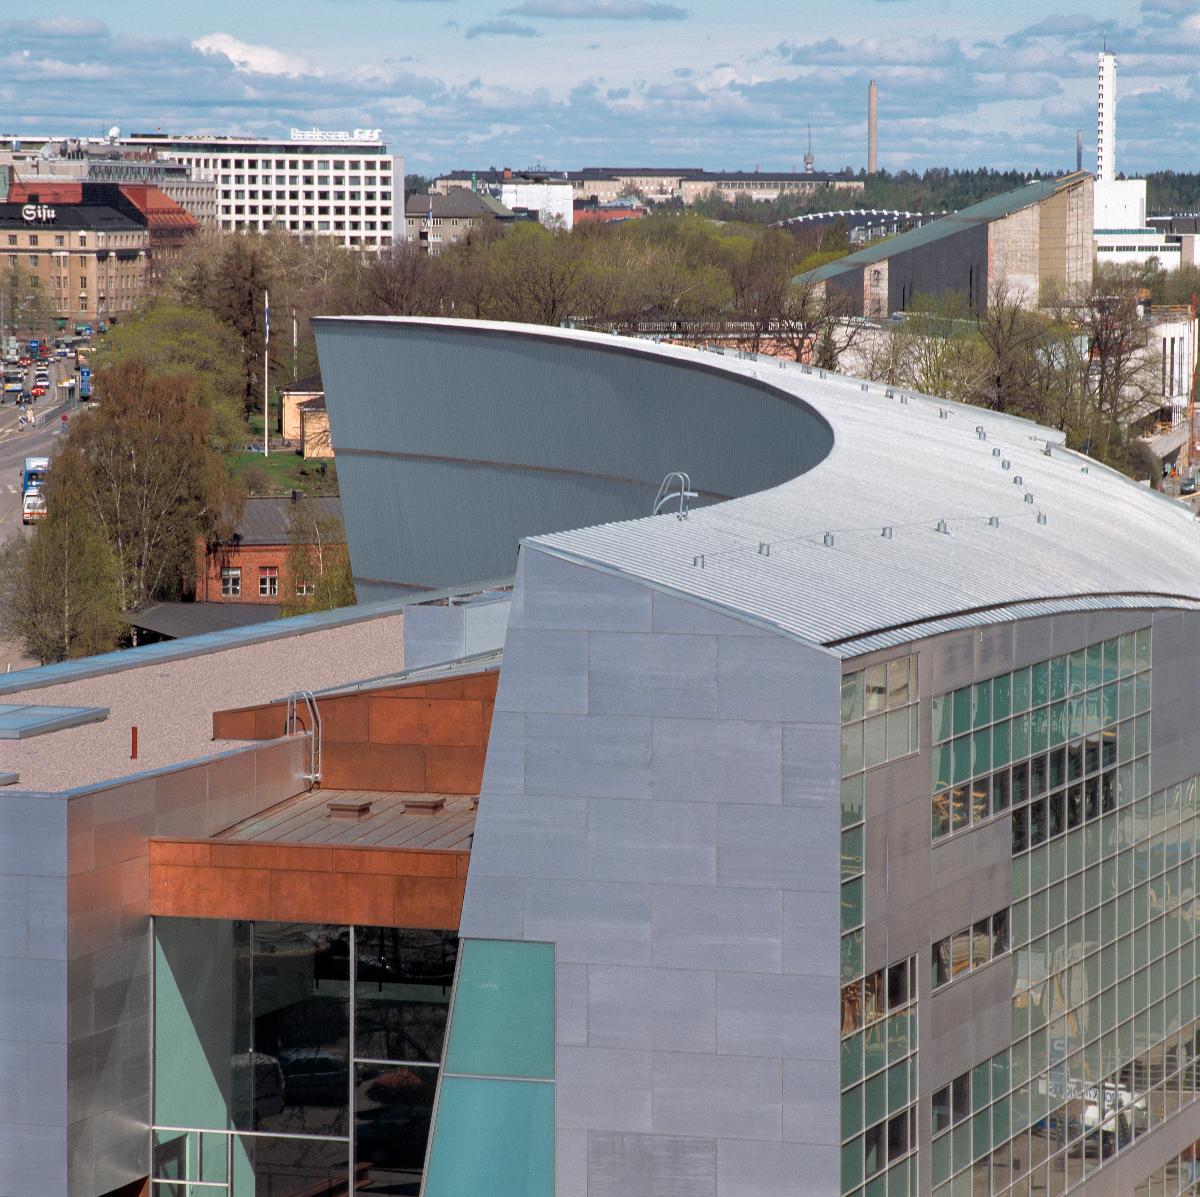 Kiasma The backbone of the building is a 190-metre-long load-bearing wall. At the southern end (in the foreground), the wall rotates inwards by 9.5 degrees. At the northern end, the wall becomes a glass façade tilted outwards by 9.5 degrees